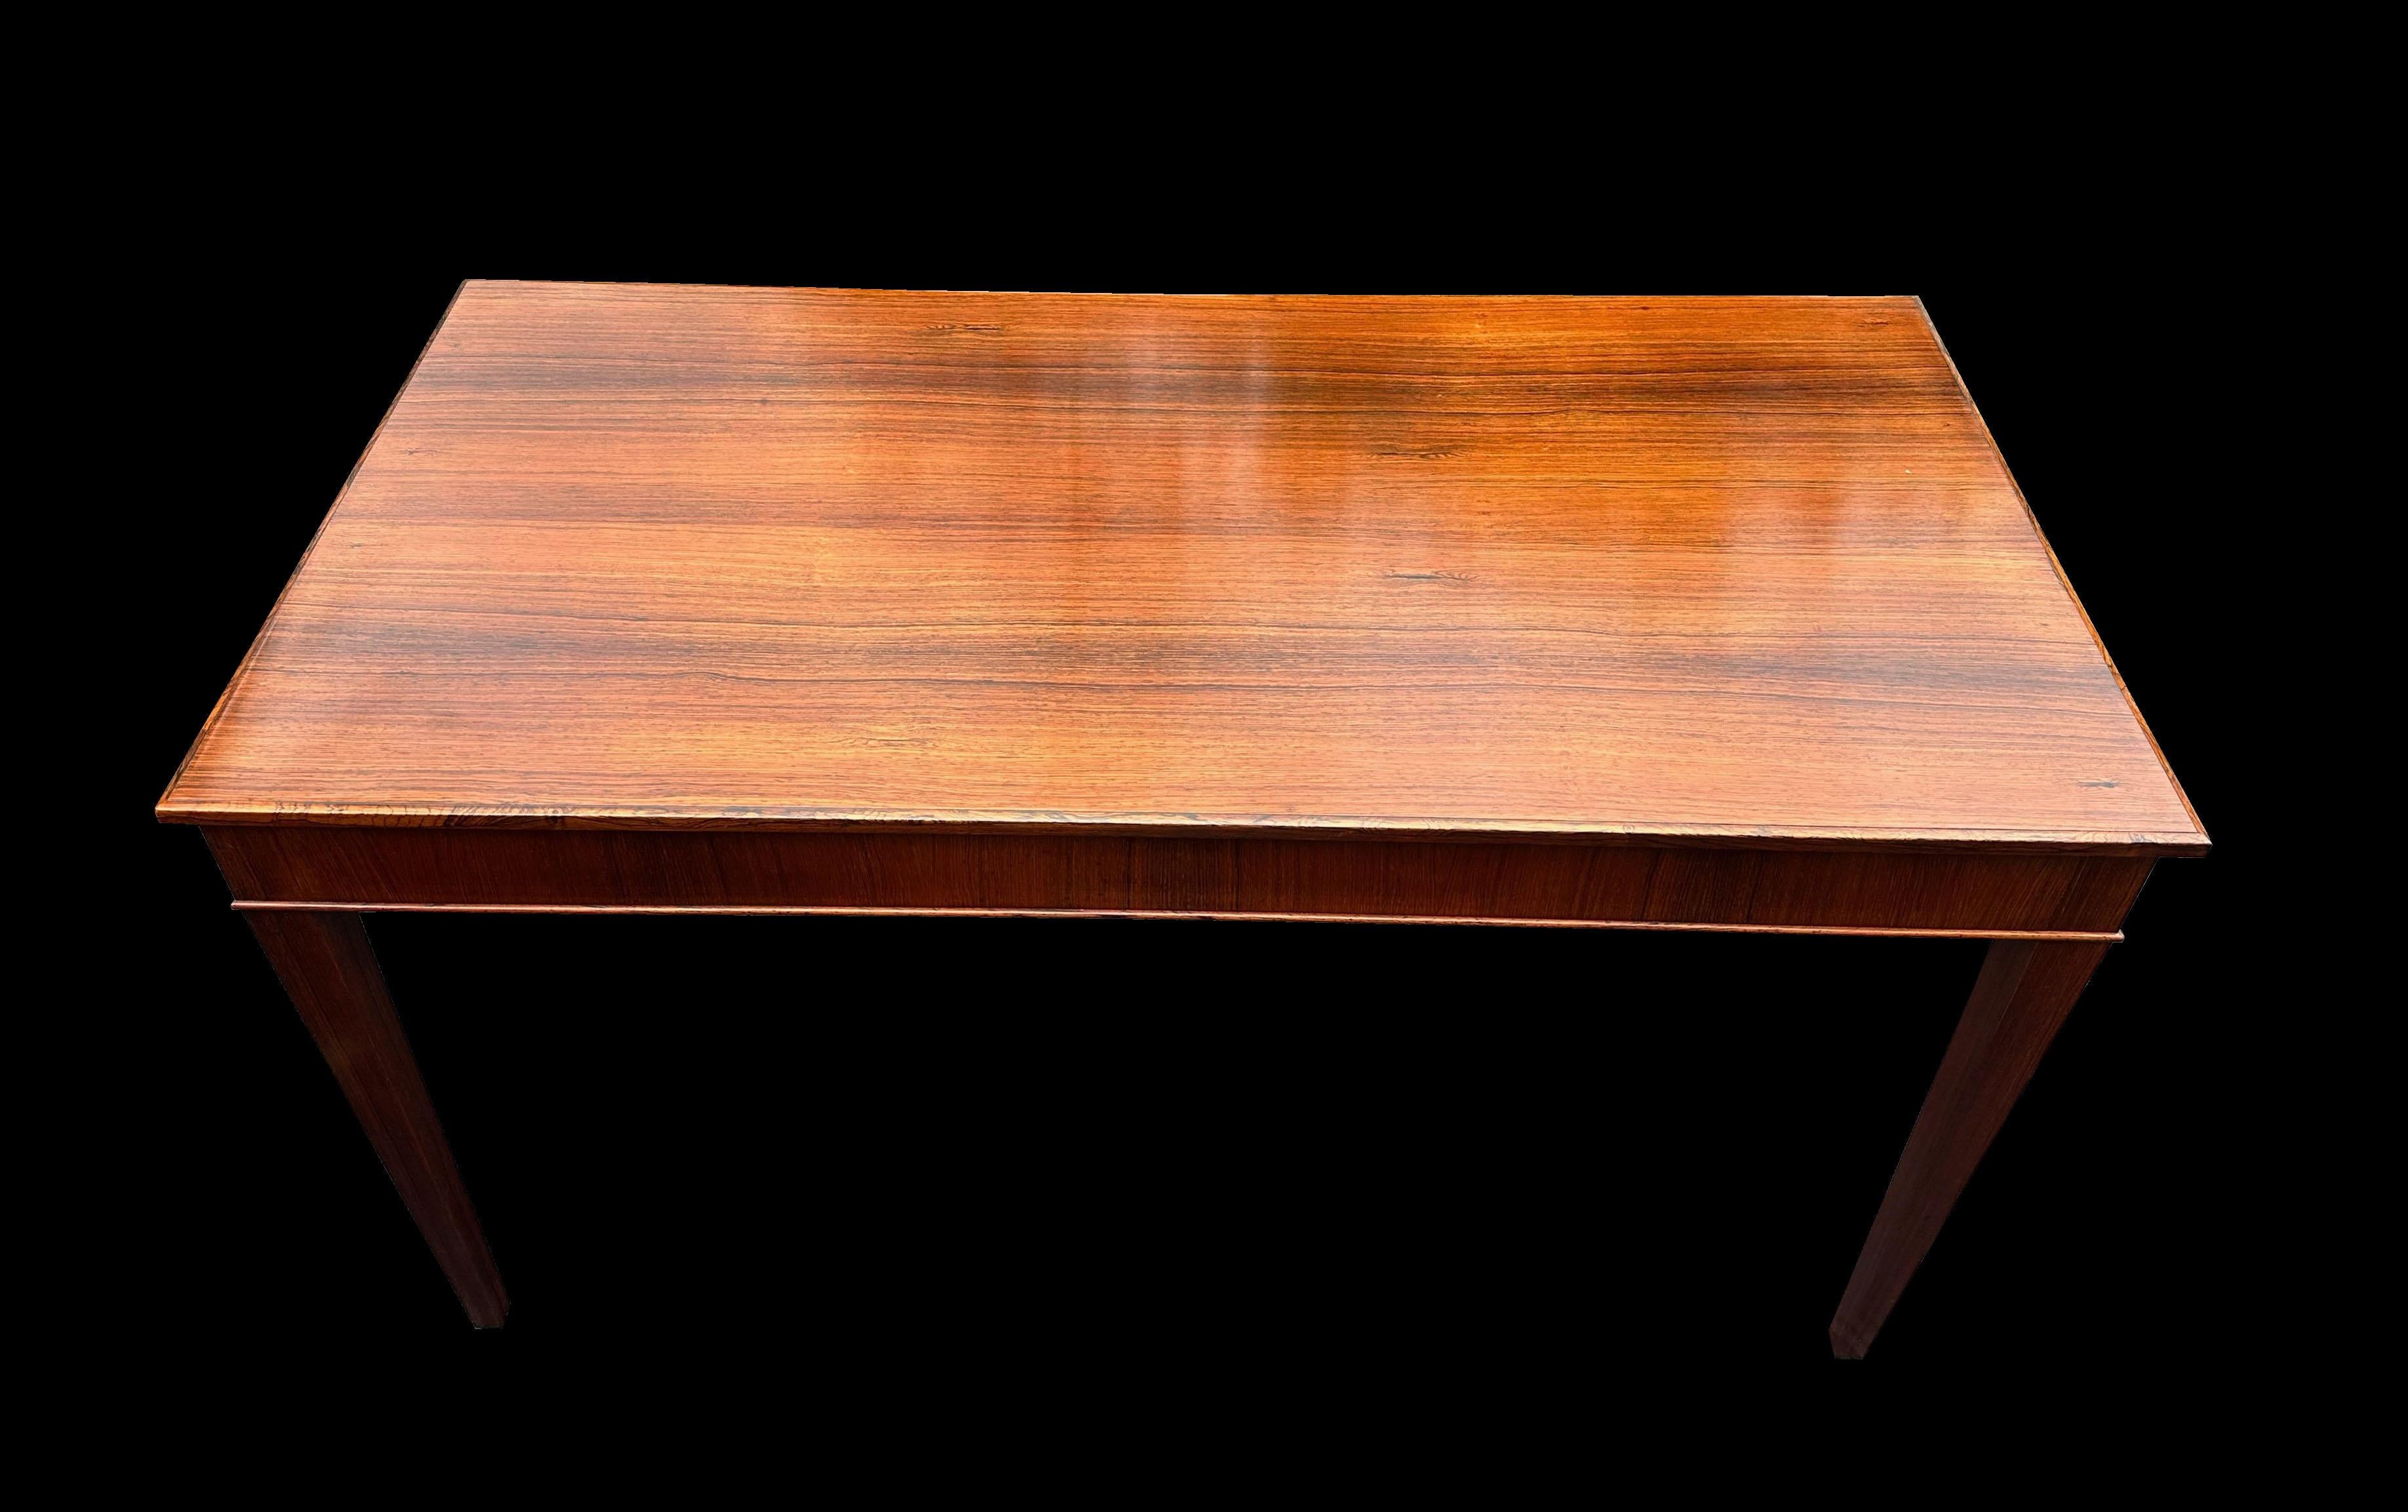 This is a classic piece of early Scandinavian design, made from Santos Rosewood it's on the edge of the change between antique and mid-century and fits beautifully with both camps. Top quality and made by the cabinetmaker who also designed it.